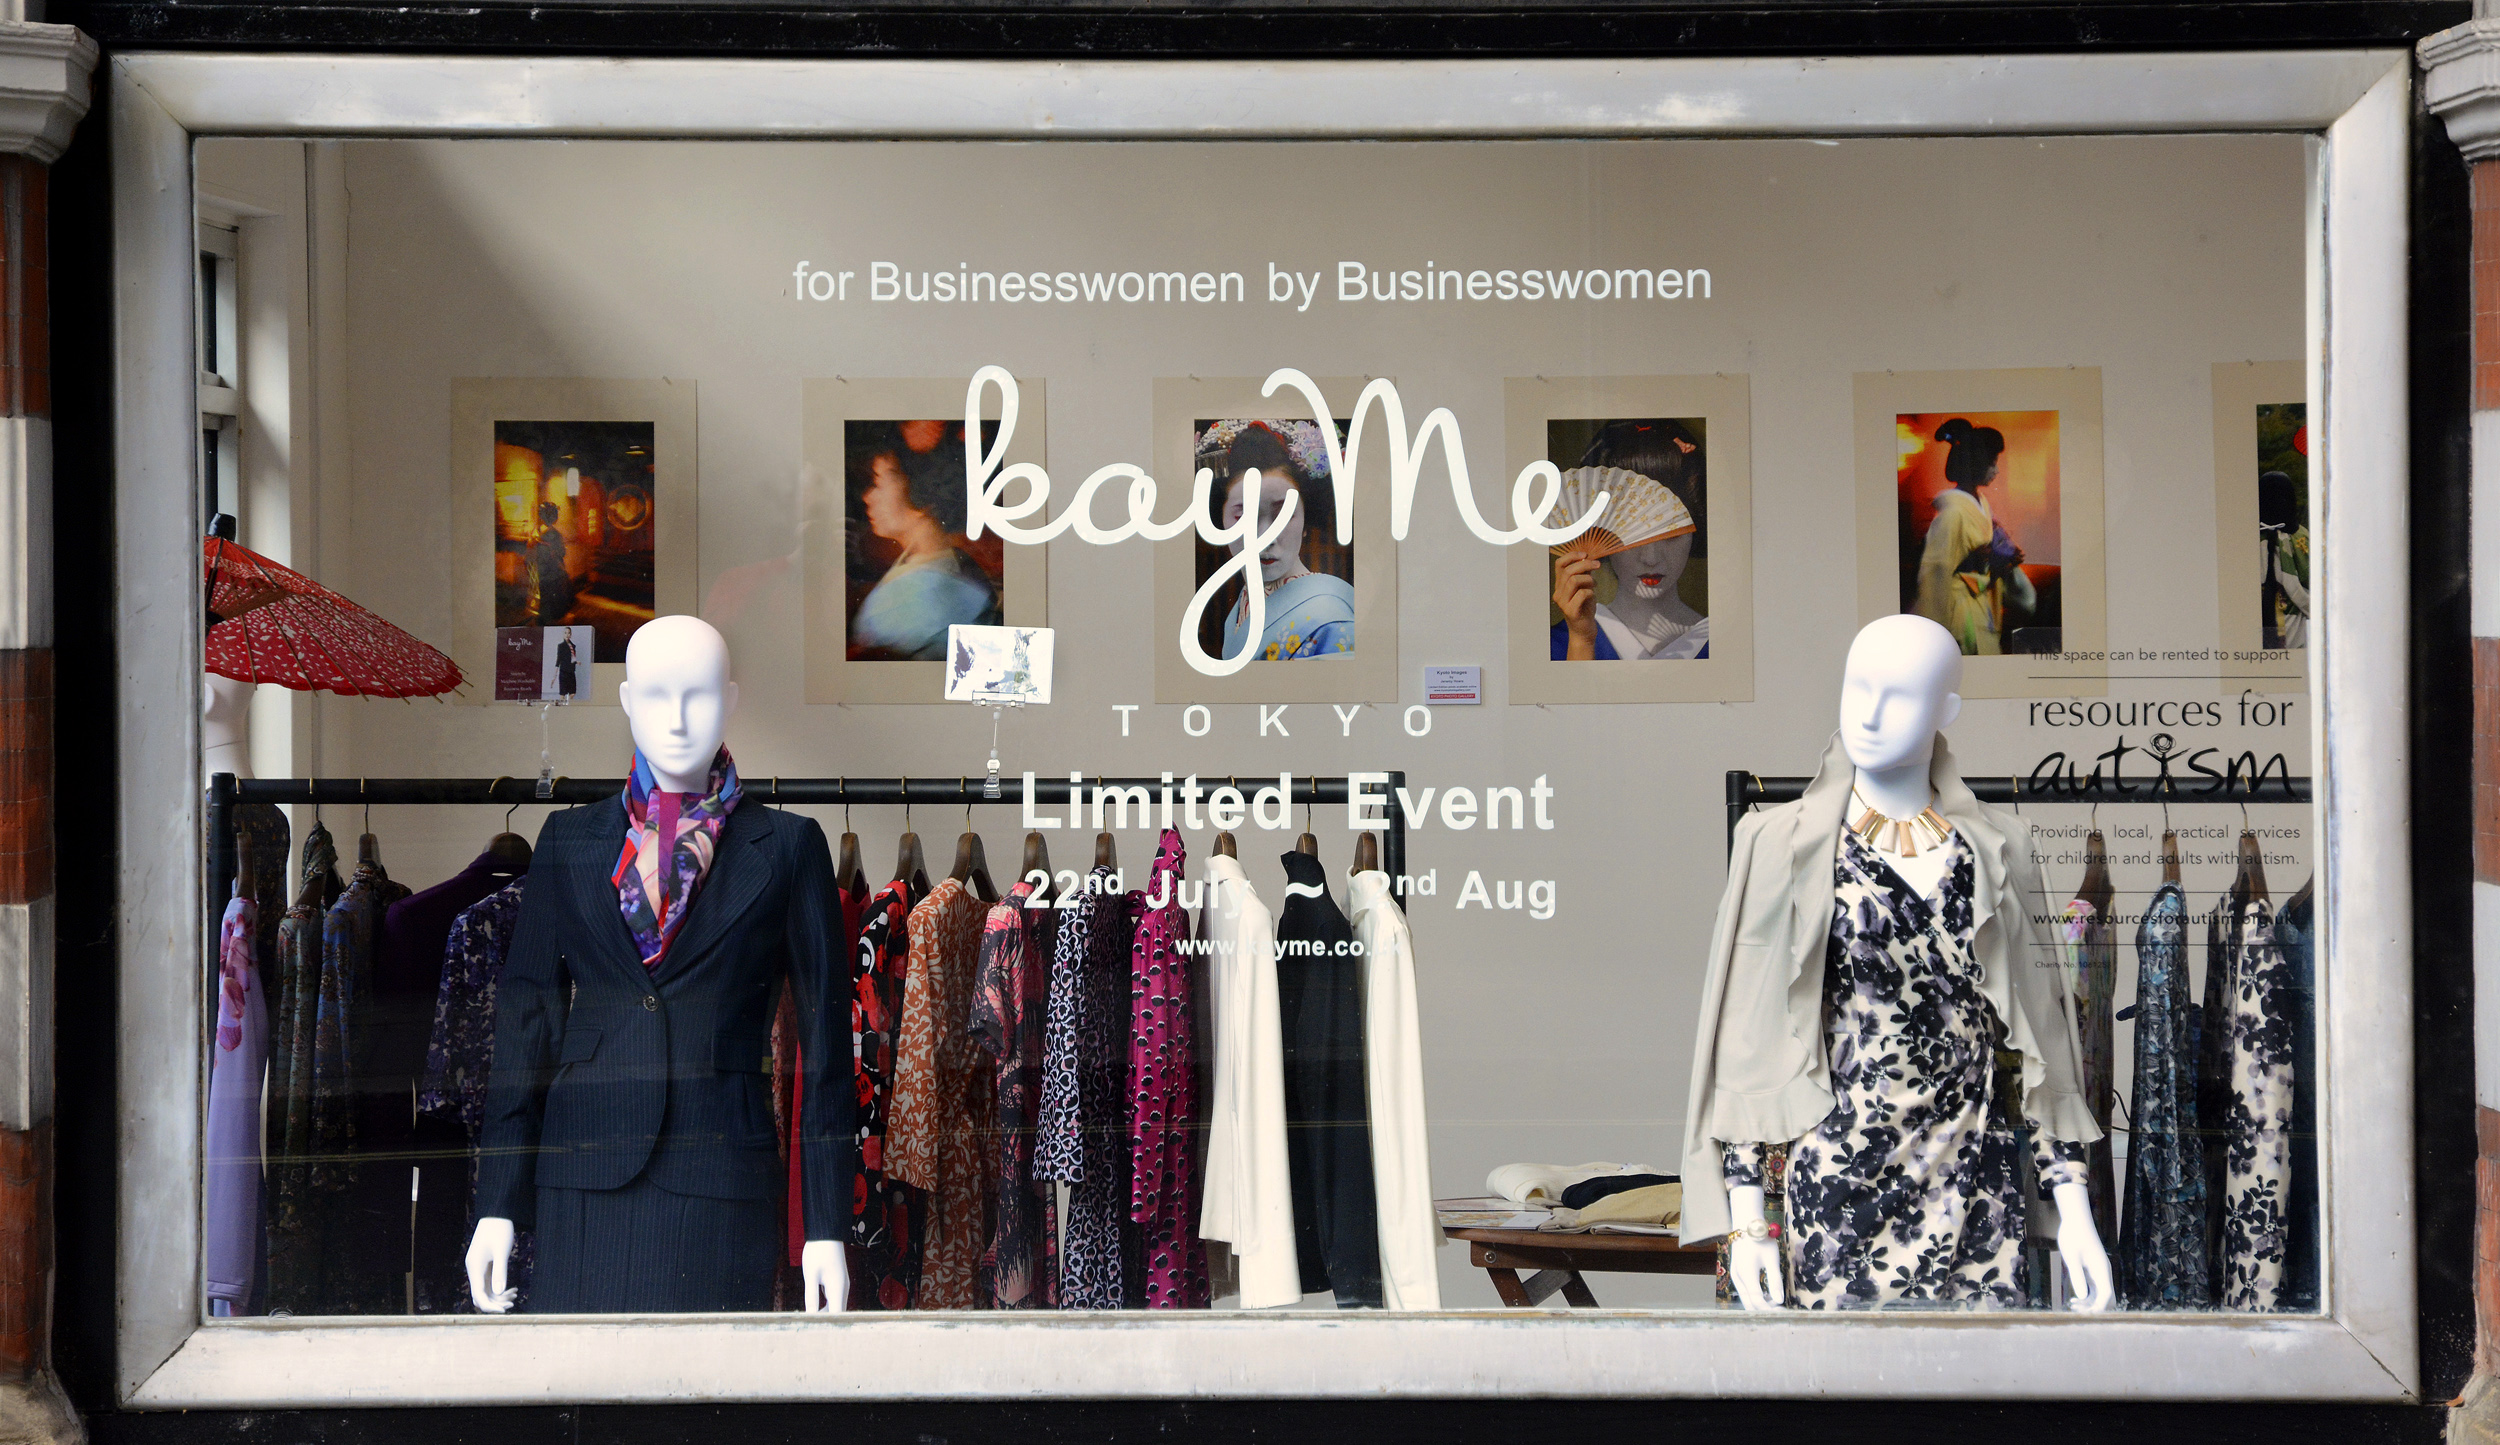 Kay Me pop-up shop at 90 Piccadilly with KPG images - 29 July 2015